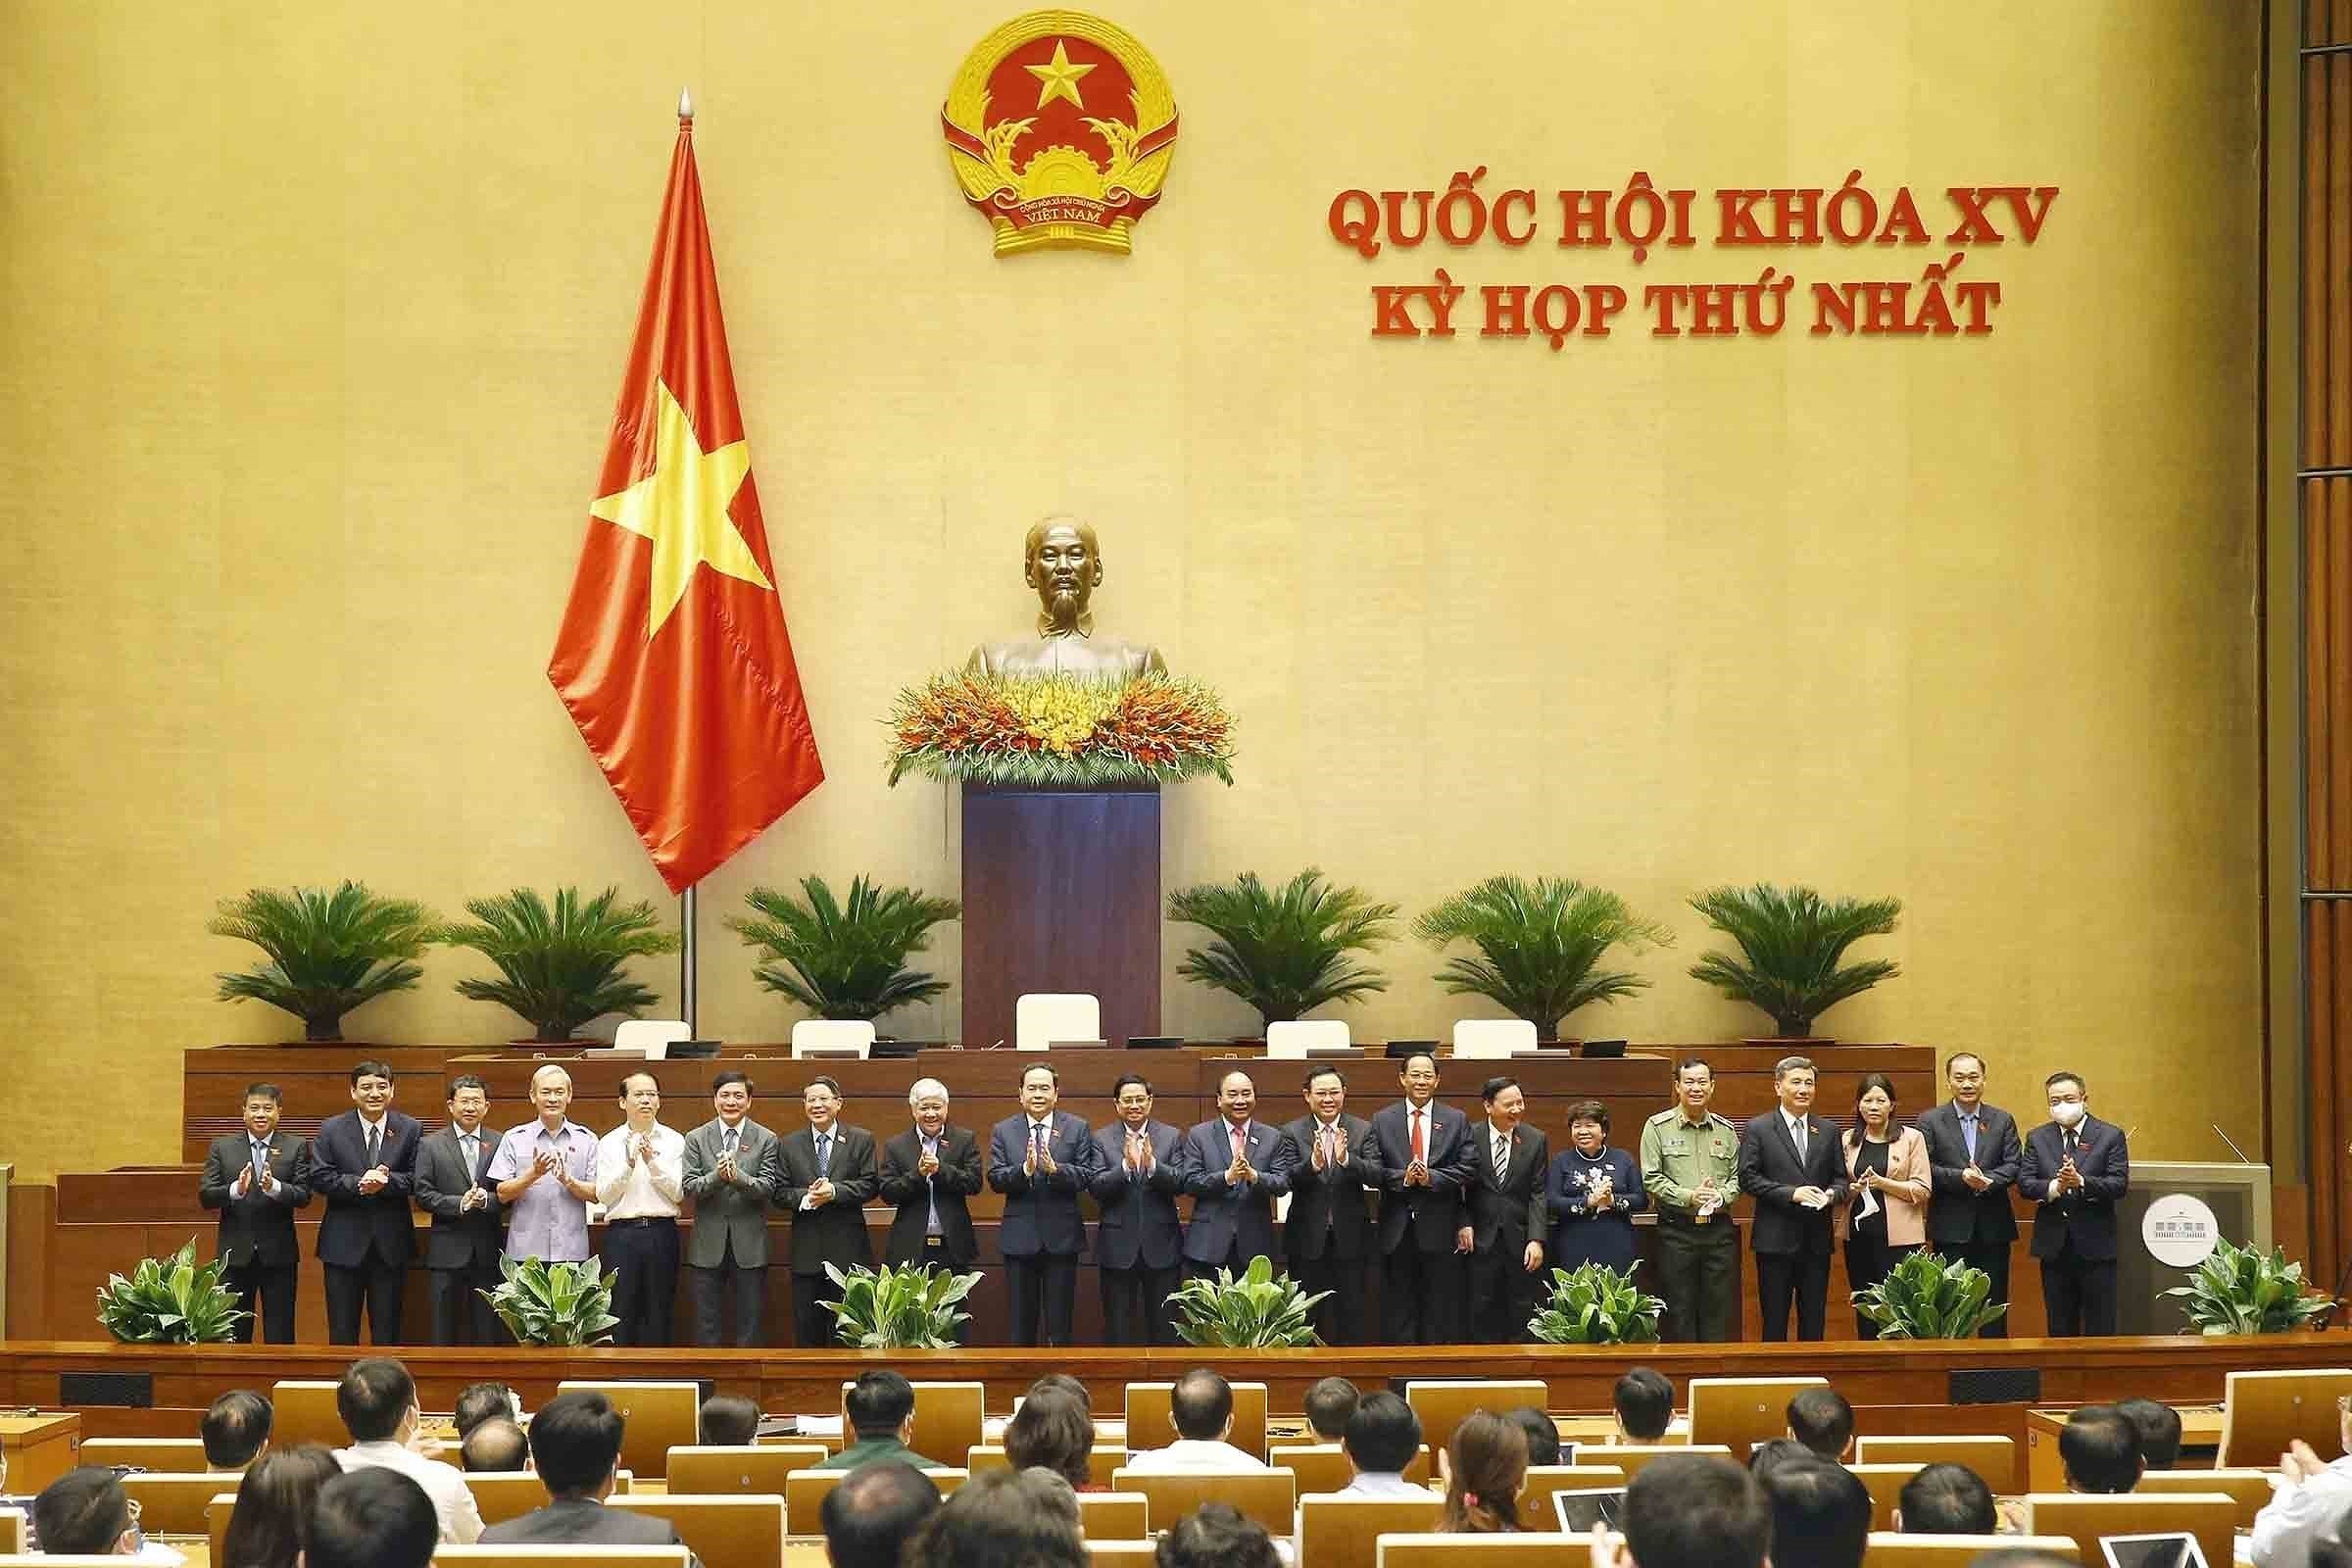 Several important positions in 15th National Assembly elected hinh anh 6